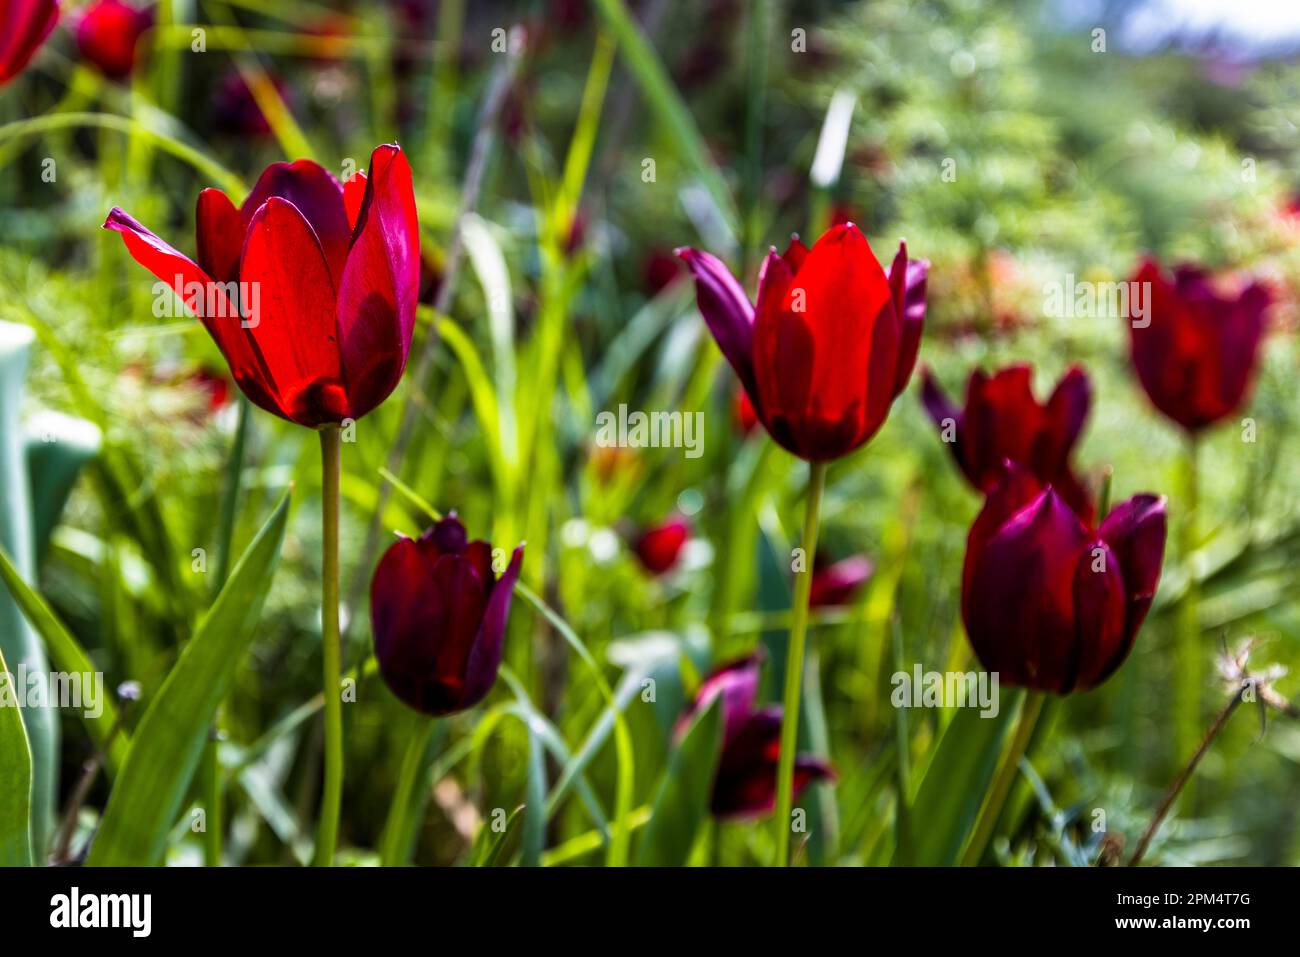 Only in the months of March and April, and only in Cyprus, these tulips (Tulipa cypria) bloom. Diorios, Cyprus. The red tulip is an endemic variety. It grows only in a few areas of Cyprus, like here at Kormakitis / Korucam in northern Cyprus. Flowering time is from mid-March Stock Photo